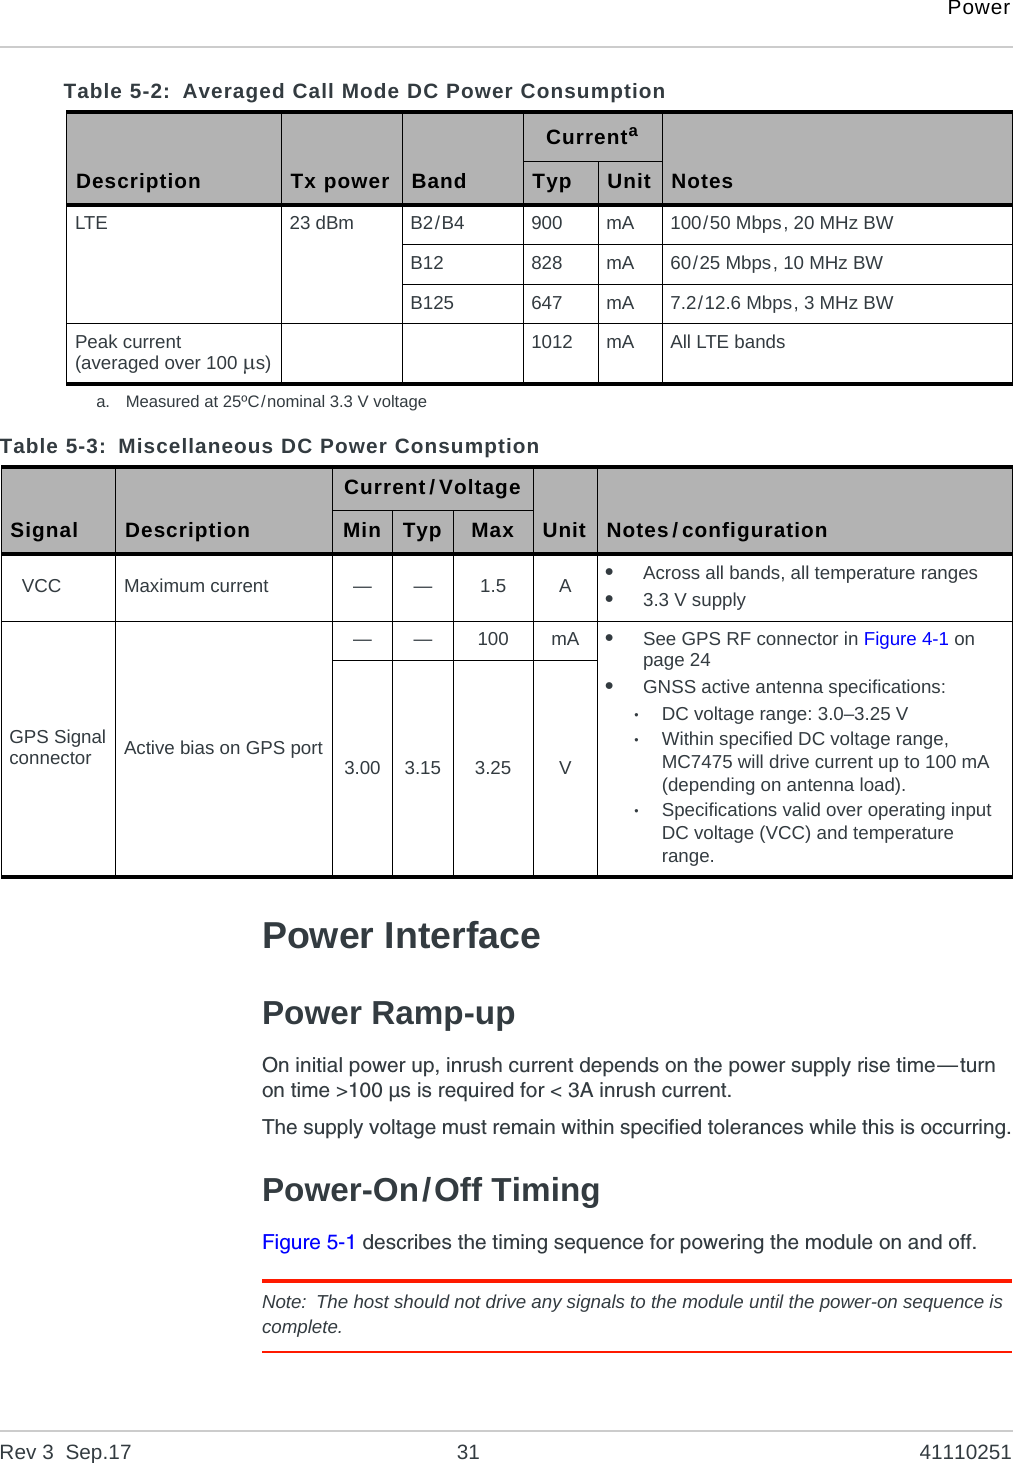 PowerRev 3  Sep.17 31 41110251Power InterfacePower Ramp-upOn initial power up, inrush current depends on the power supply rise time—turn on time &gt;100 µs is required for &lt; 3A inrush current.The supply voltage must remain within specified tolerances while this is occurring.Power-On/Off TimingFigure 5-1 describes the timing sequence for powering the module on and off.Note: The host should not drive any signals to the module until the power-on sequence is complete.Table 5-2: Averaged Call Mode DC Power ConsumptionDescription Tx power BandCurrentaNotesTyp UnitLTE 23 dBm B2/B4 900 mA 100/50 Mbps, 20 MHz BWB12 828 mA 60/25 Mbps, 10 MHz BWB125 647 mA 7.2/12.6 Mbps, 3 MHz BWPeak current(averaged over 100 s) 1012 mA All LTE bandsa. Measured at 25ºC/nominal 3.3 V voltageTable 5-3: Miscellaneous DC Power ConsumptionSignal DescriptionCurrent/VoltageUnit Notes/configurationMin Typ MaxVCC Maximum current — — 1.5 A•Across all bands, all temperature ranges•3.3 V supplyGPS Signalconnector Active bias on GPS port— — 100 mA •See GPS RF connector in Figure 4-1 on page 24•GNSS active antenna specifications:·DC voltage range: 3.0–3.25 V·Within specified DC voltage range, MC7475 will drive current up to 100 mA (depending on antenna load).·Specifications valid over operating input DC voltage (VCC) and temperature range.3.00 3.15 3.25 V